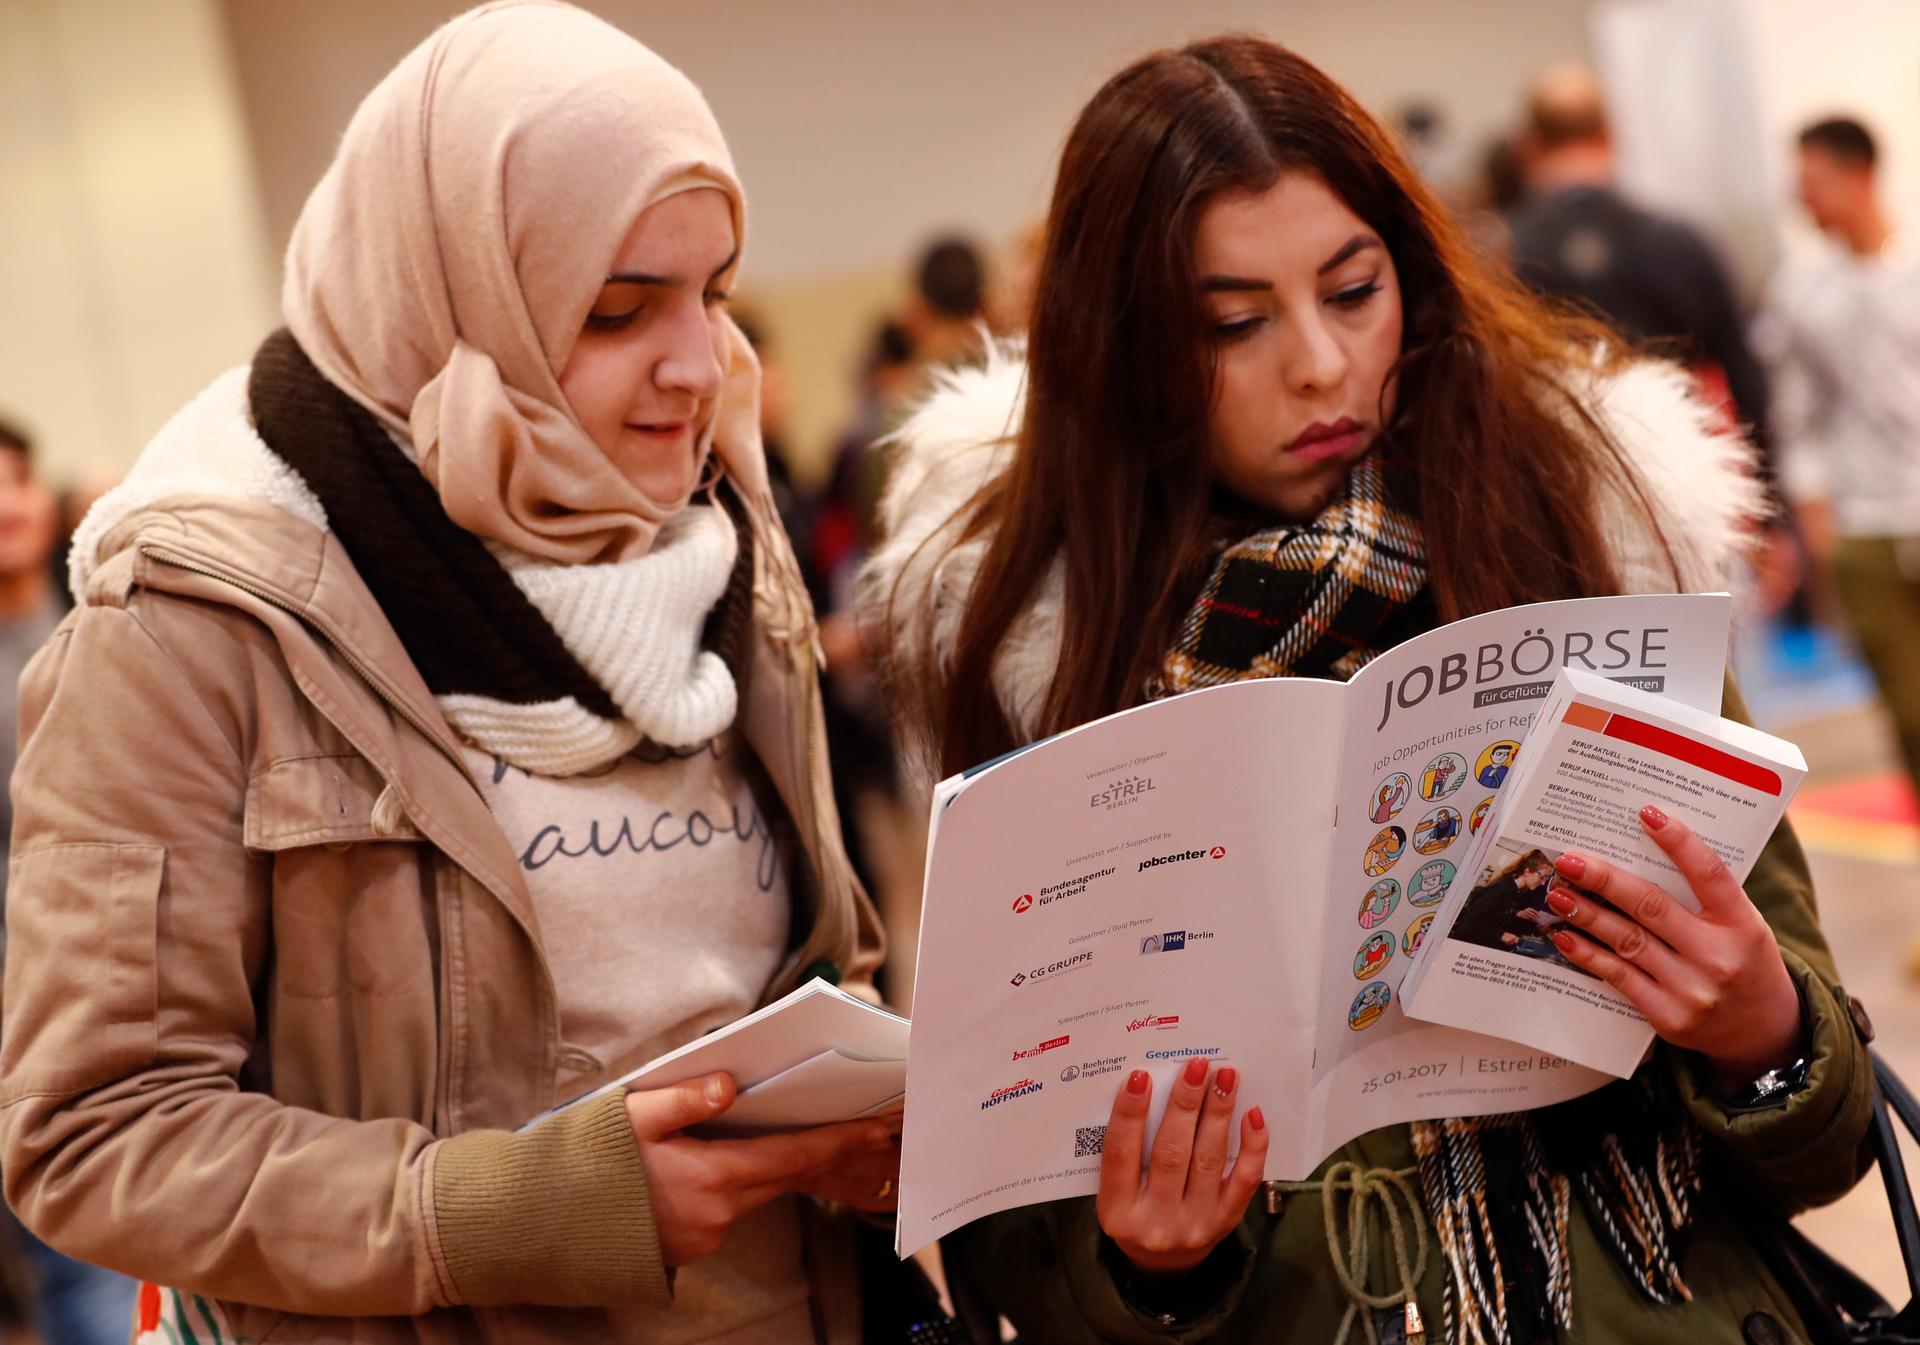 Two women visit a job fair for migrants and refugees in Berlin, Germany, Jan. 25, 2017.